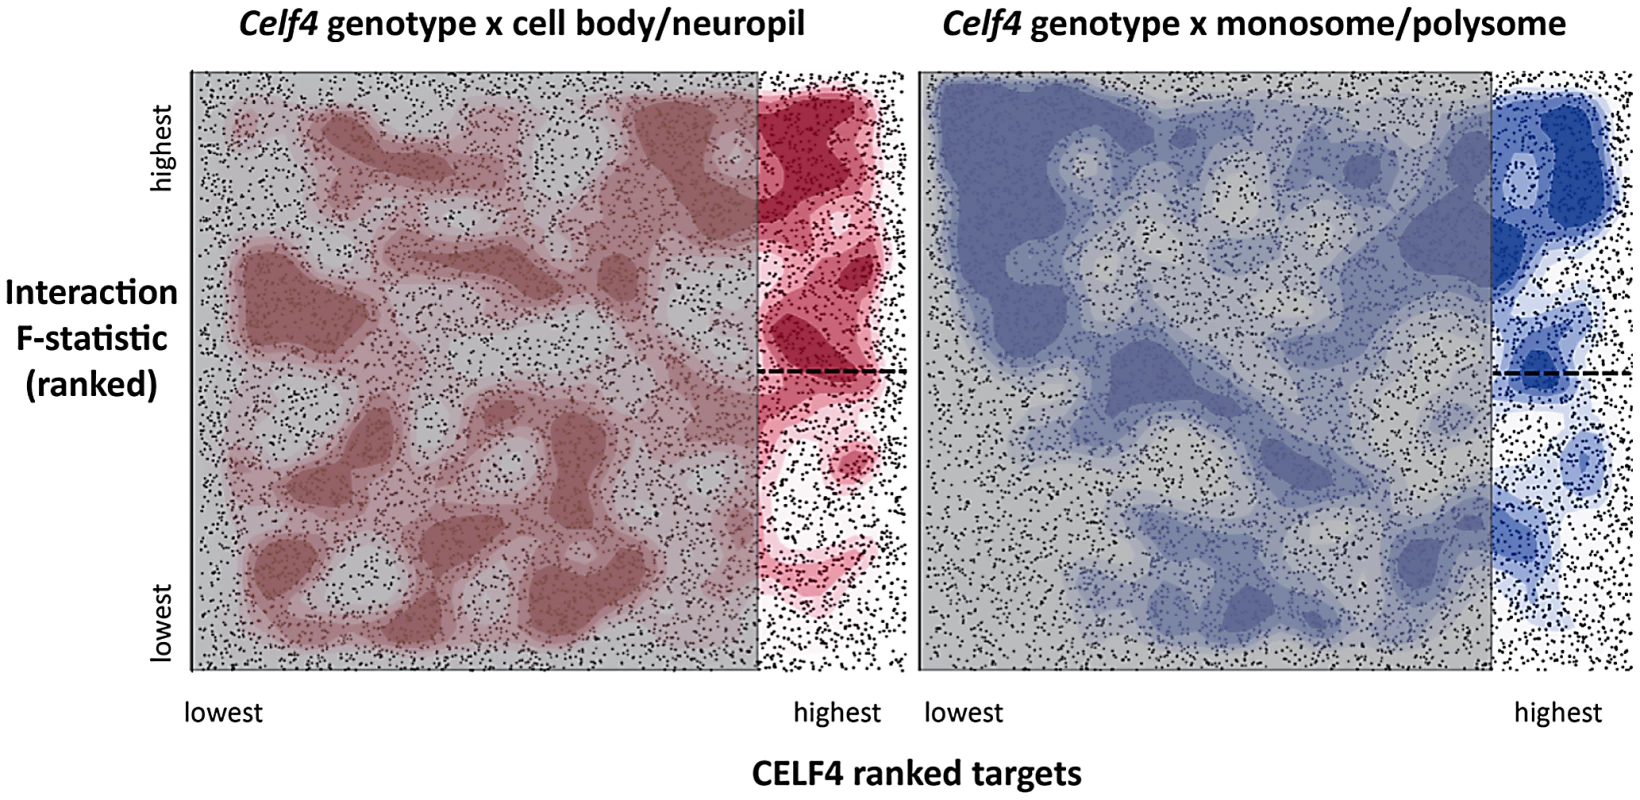 Visualization of <i>Celf4</i> genotype-dependent shift of CELF4 target mRNAs between polysome fractions and along the cell body/neuropil axis of CA1 hippocampal neurons.